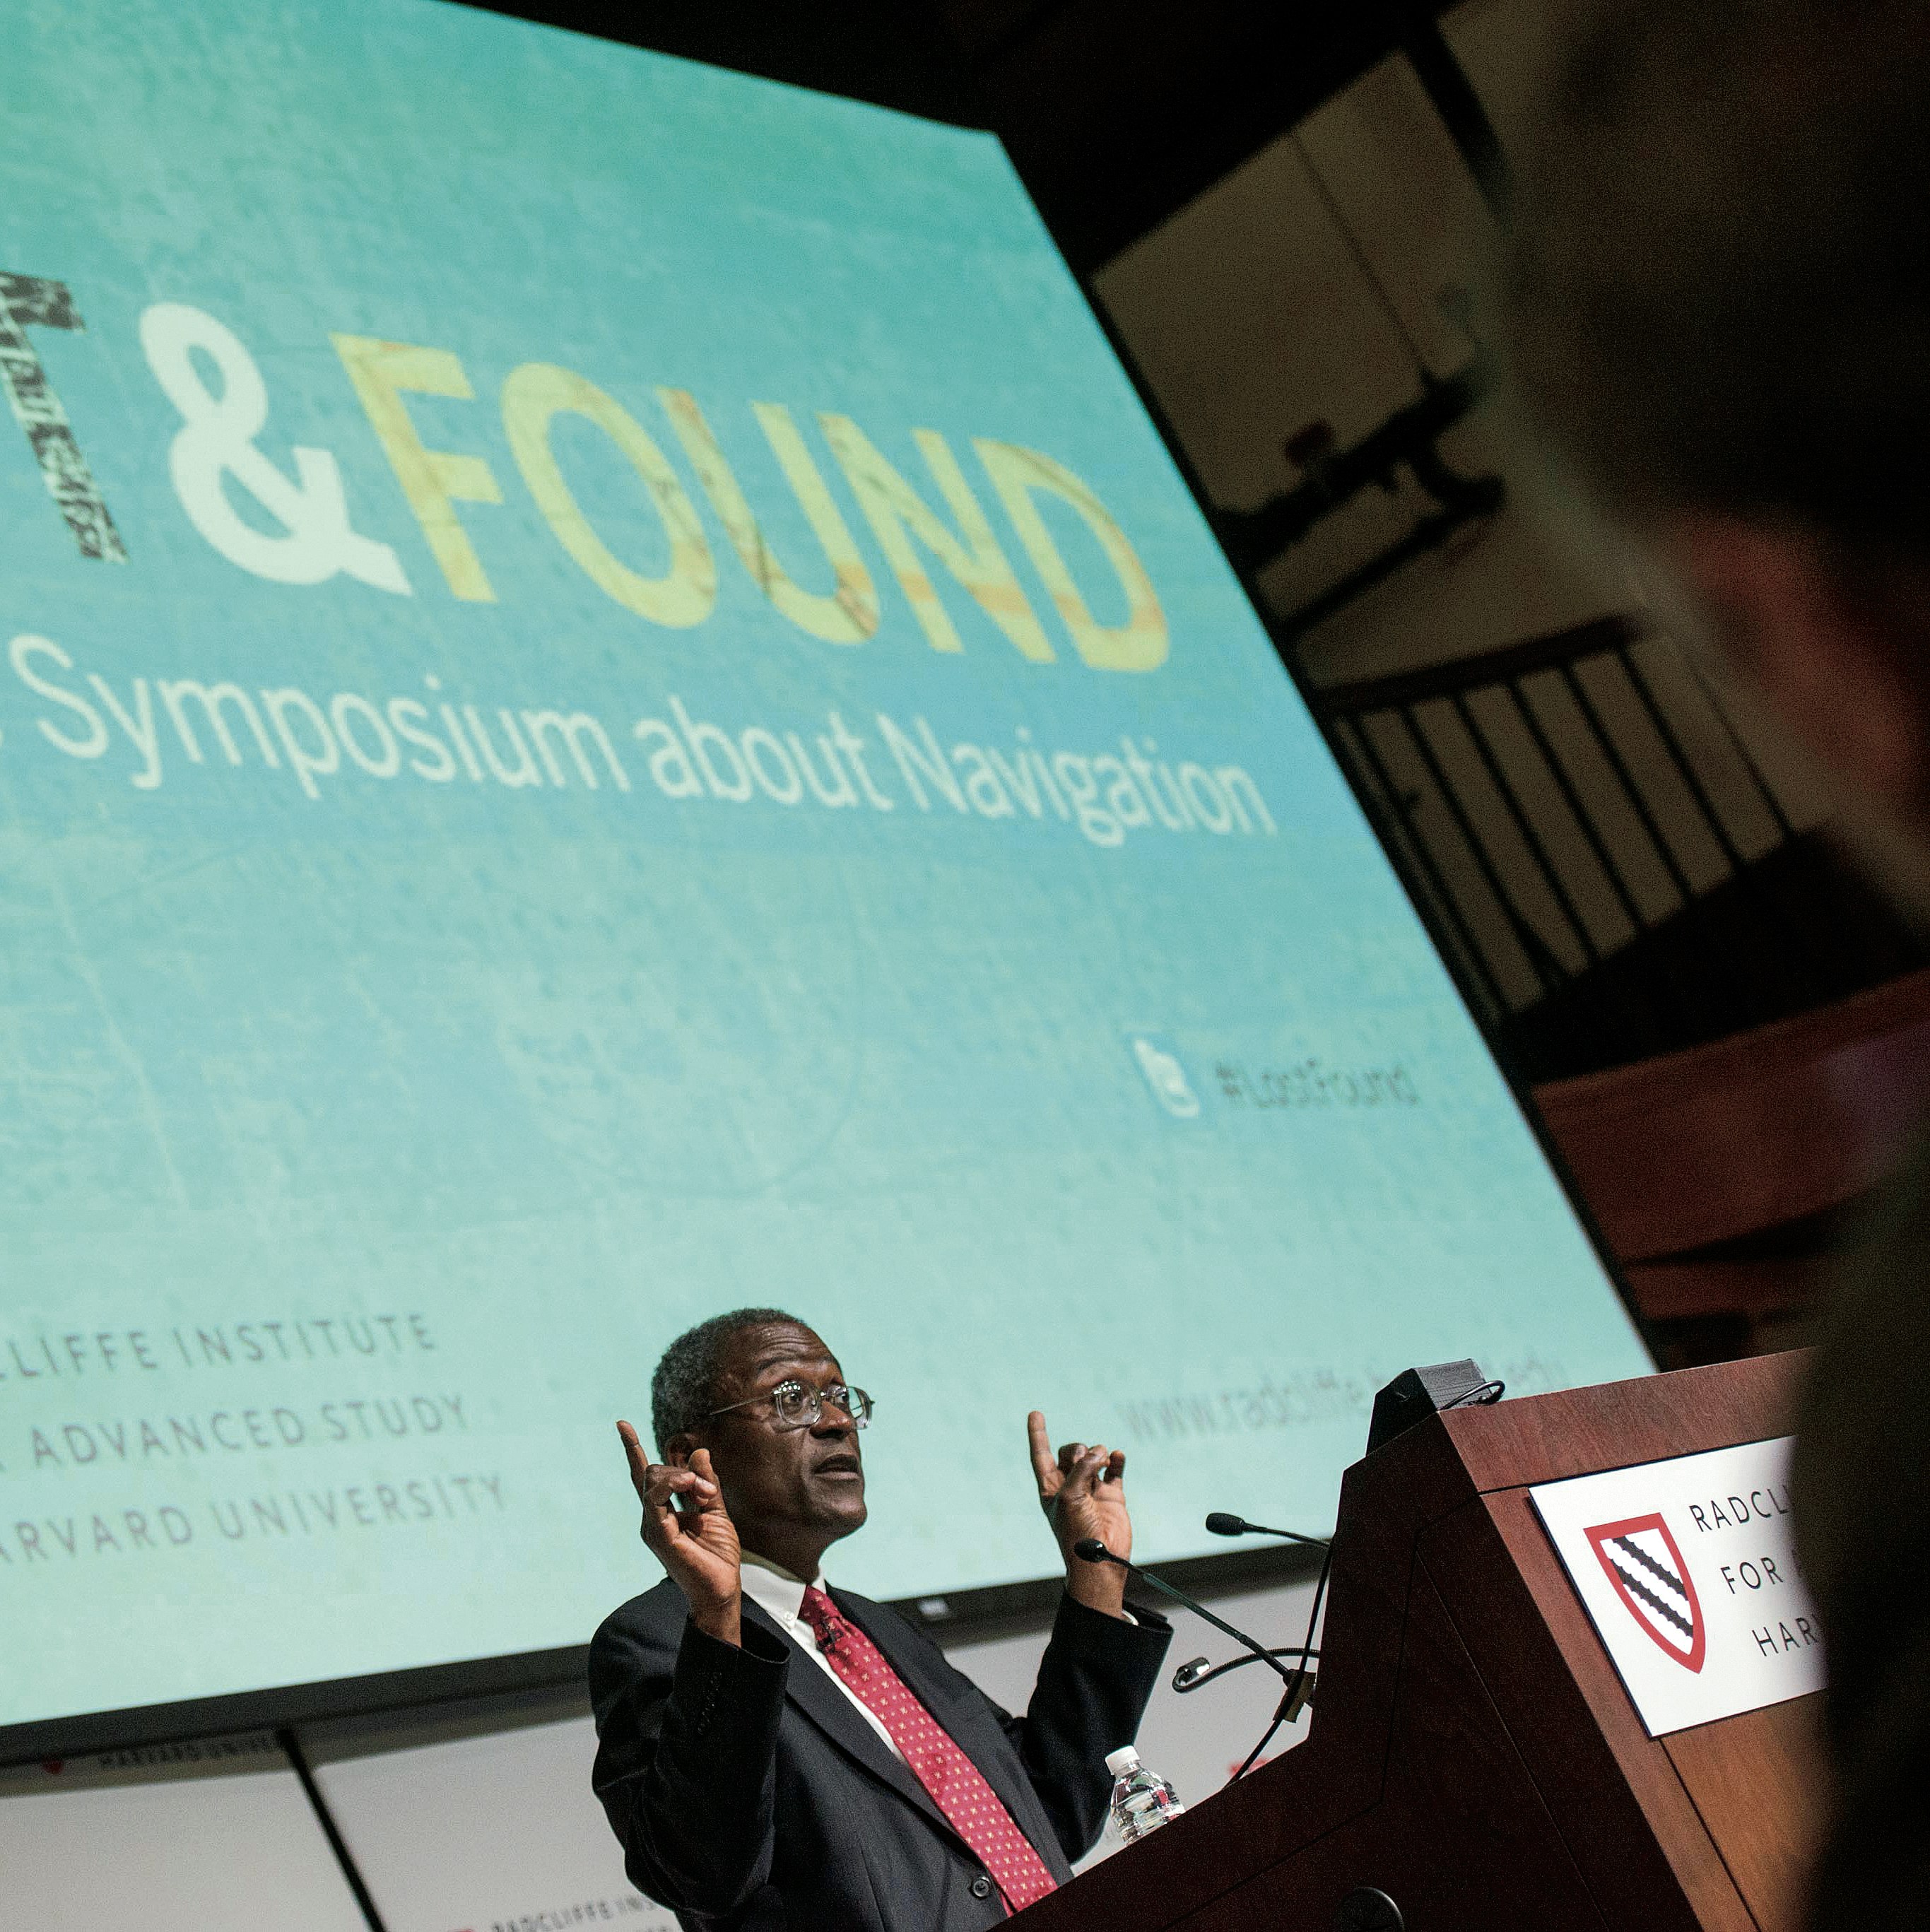 Hiawatha Bray speaking at the "Lost and Found" symposium.